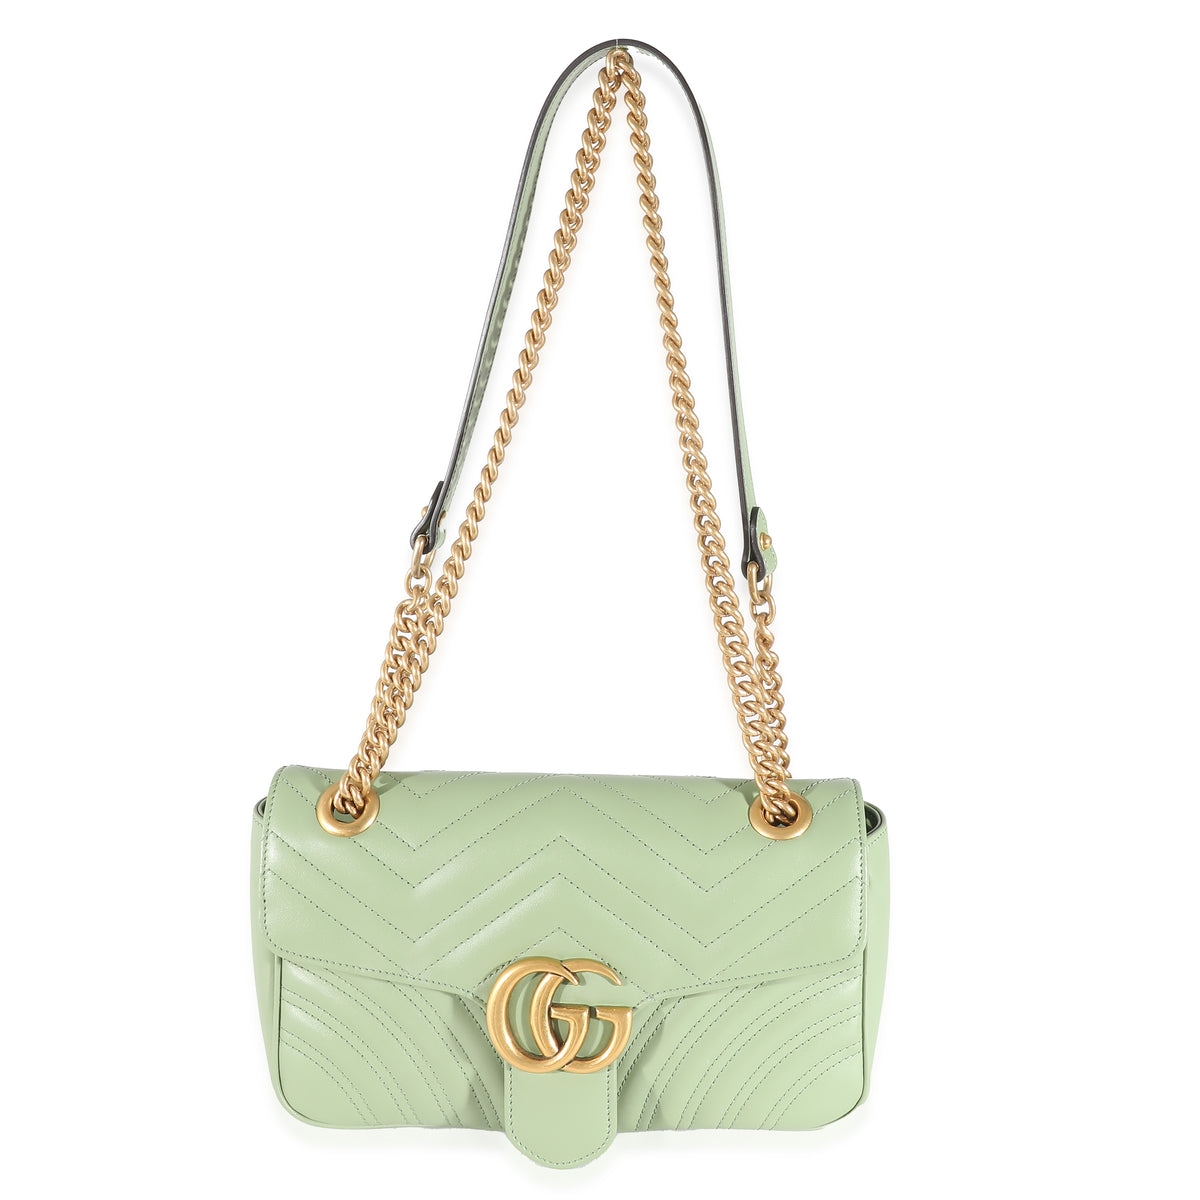 Gucci Sage Green Matelasse Leather Small GG Marmont Flap Bag